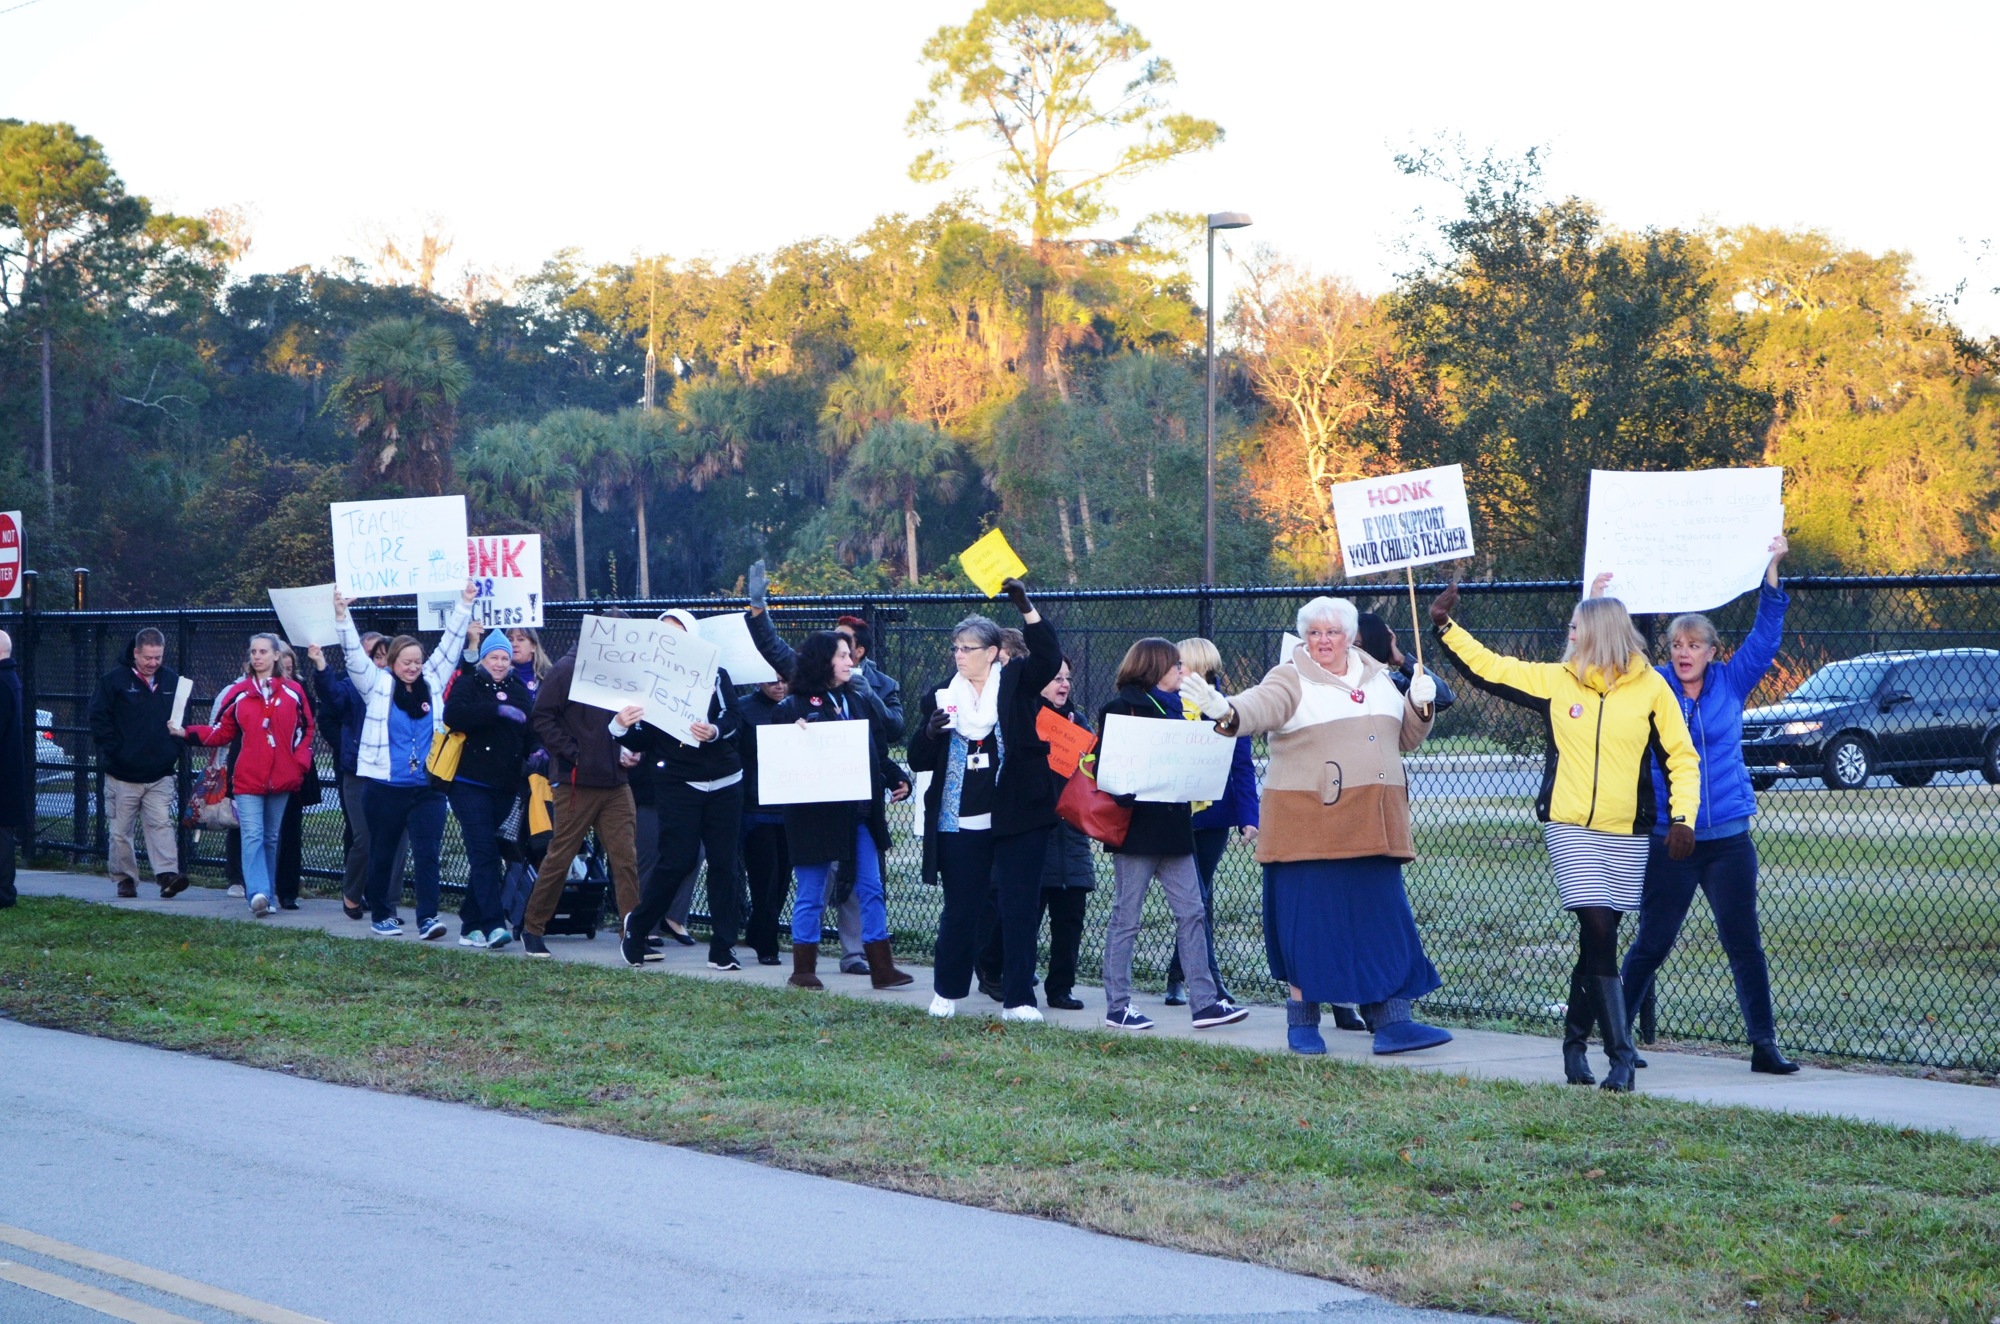 Teachers demonstrate unity in their contract negotiations in a “walk-in” at Holly Hill School.